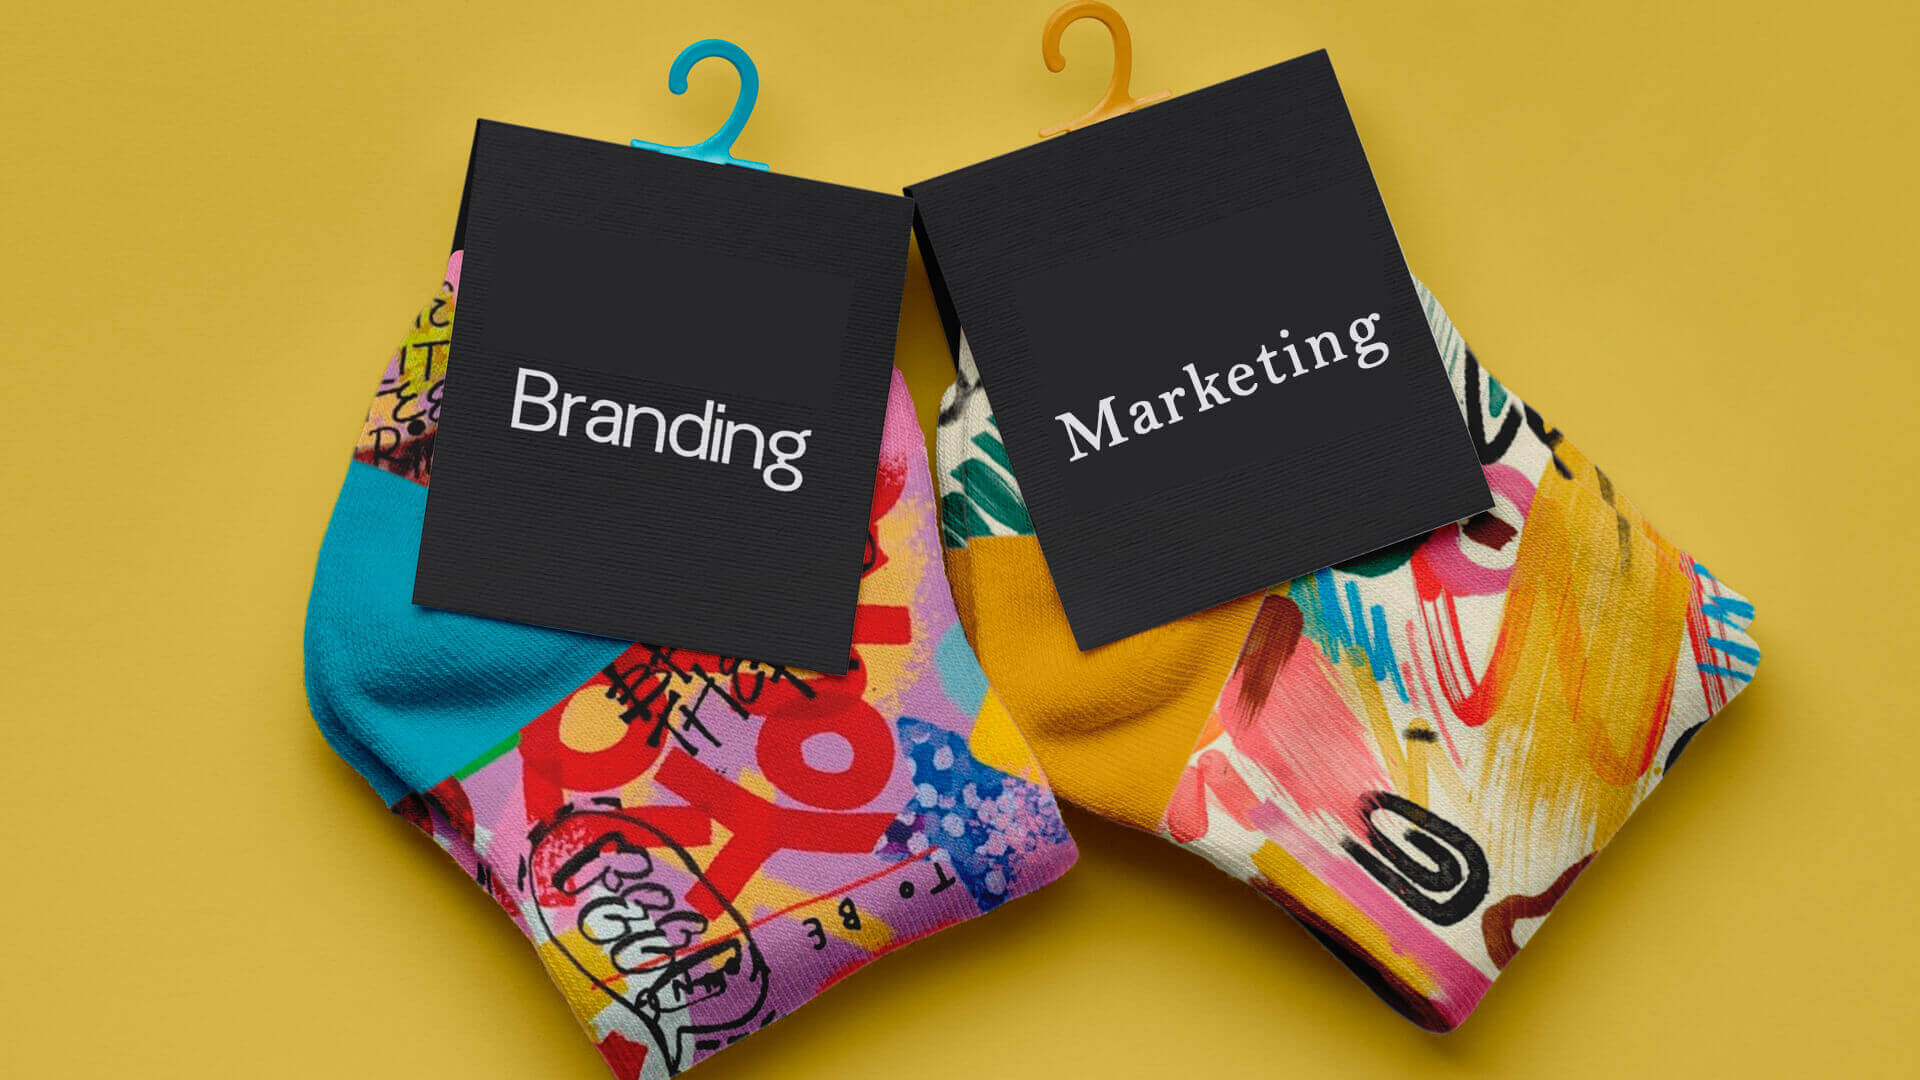 Branding vs. Marketing: What's the Difference?